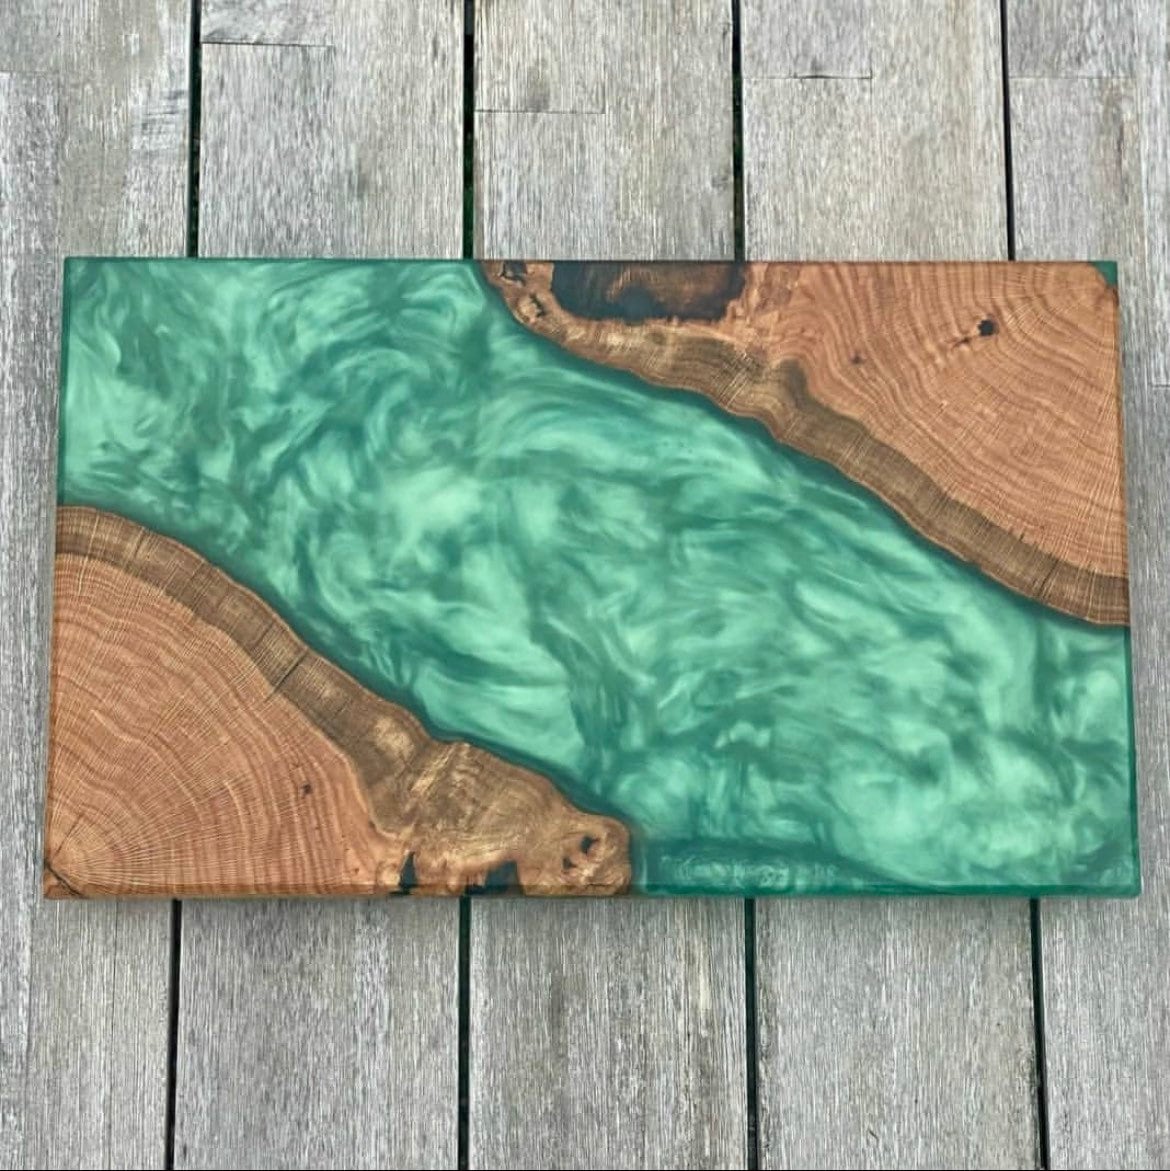 Cutting Board Made of Food Safe Epoxy Resin With Resin Art Elements 